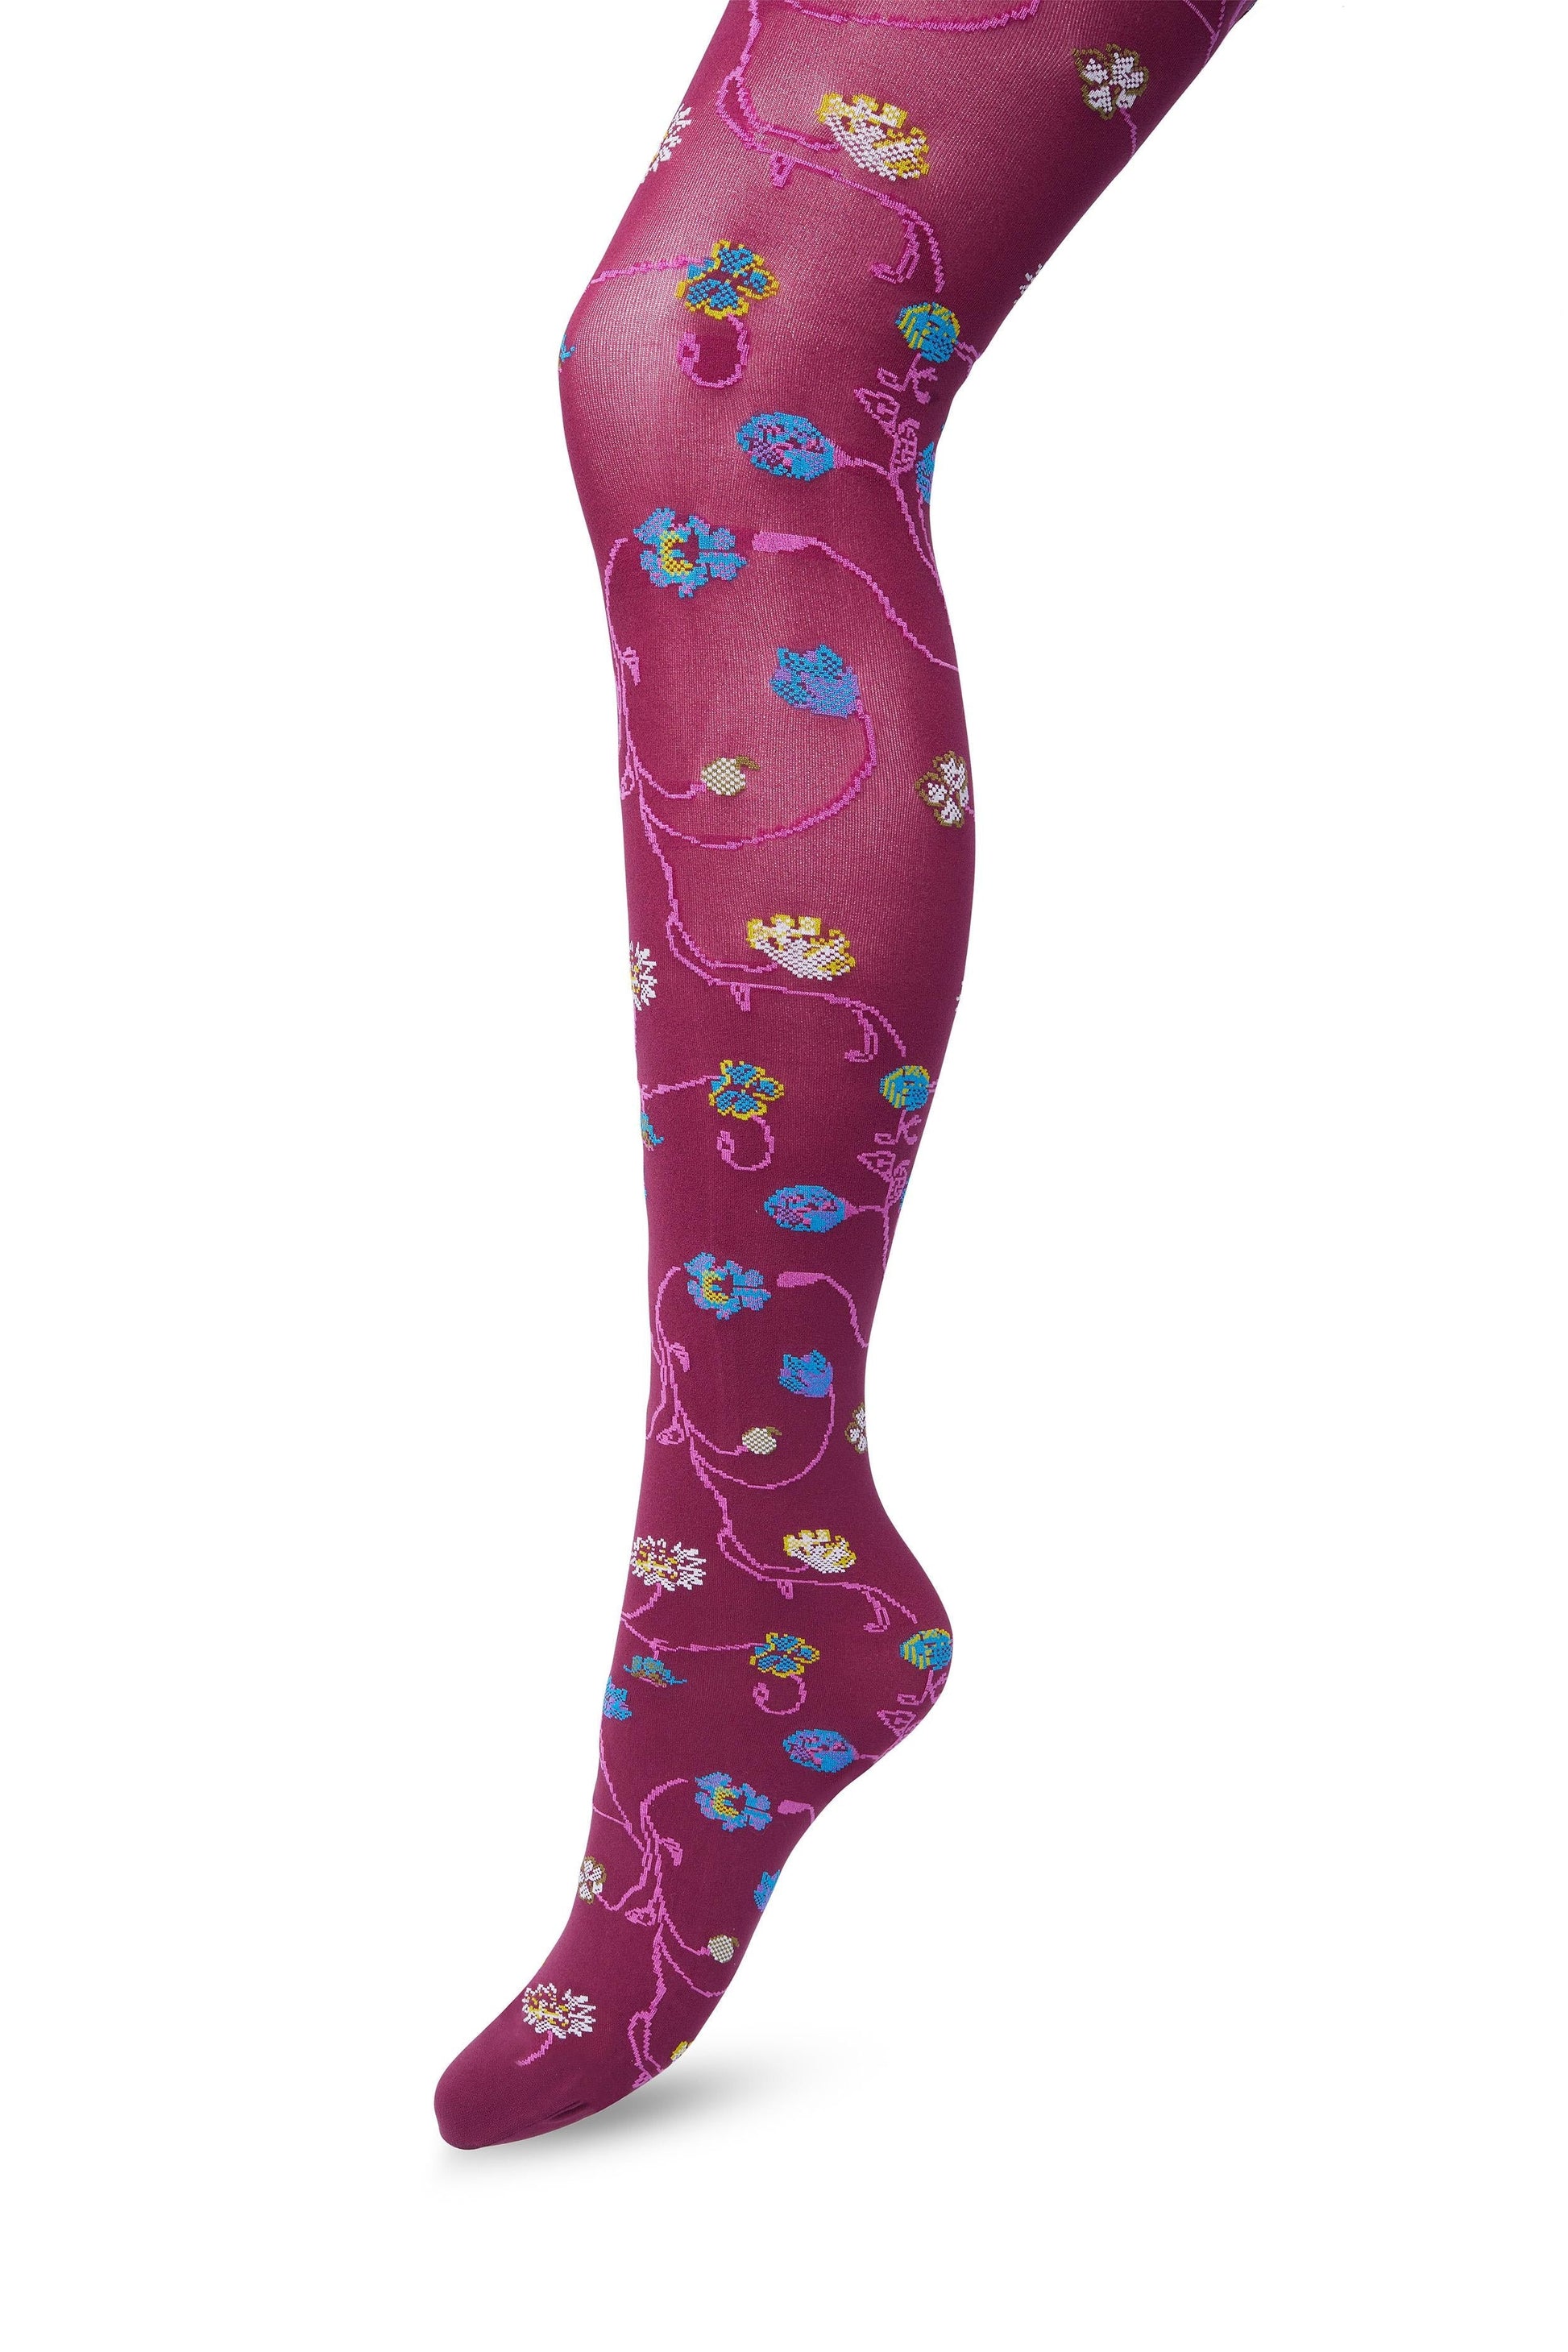 Bonnie Doon Floral Tights - Soft dark pink wine opaque fashion tights with a multicoloured woven floral pattern